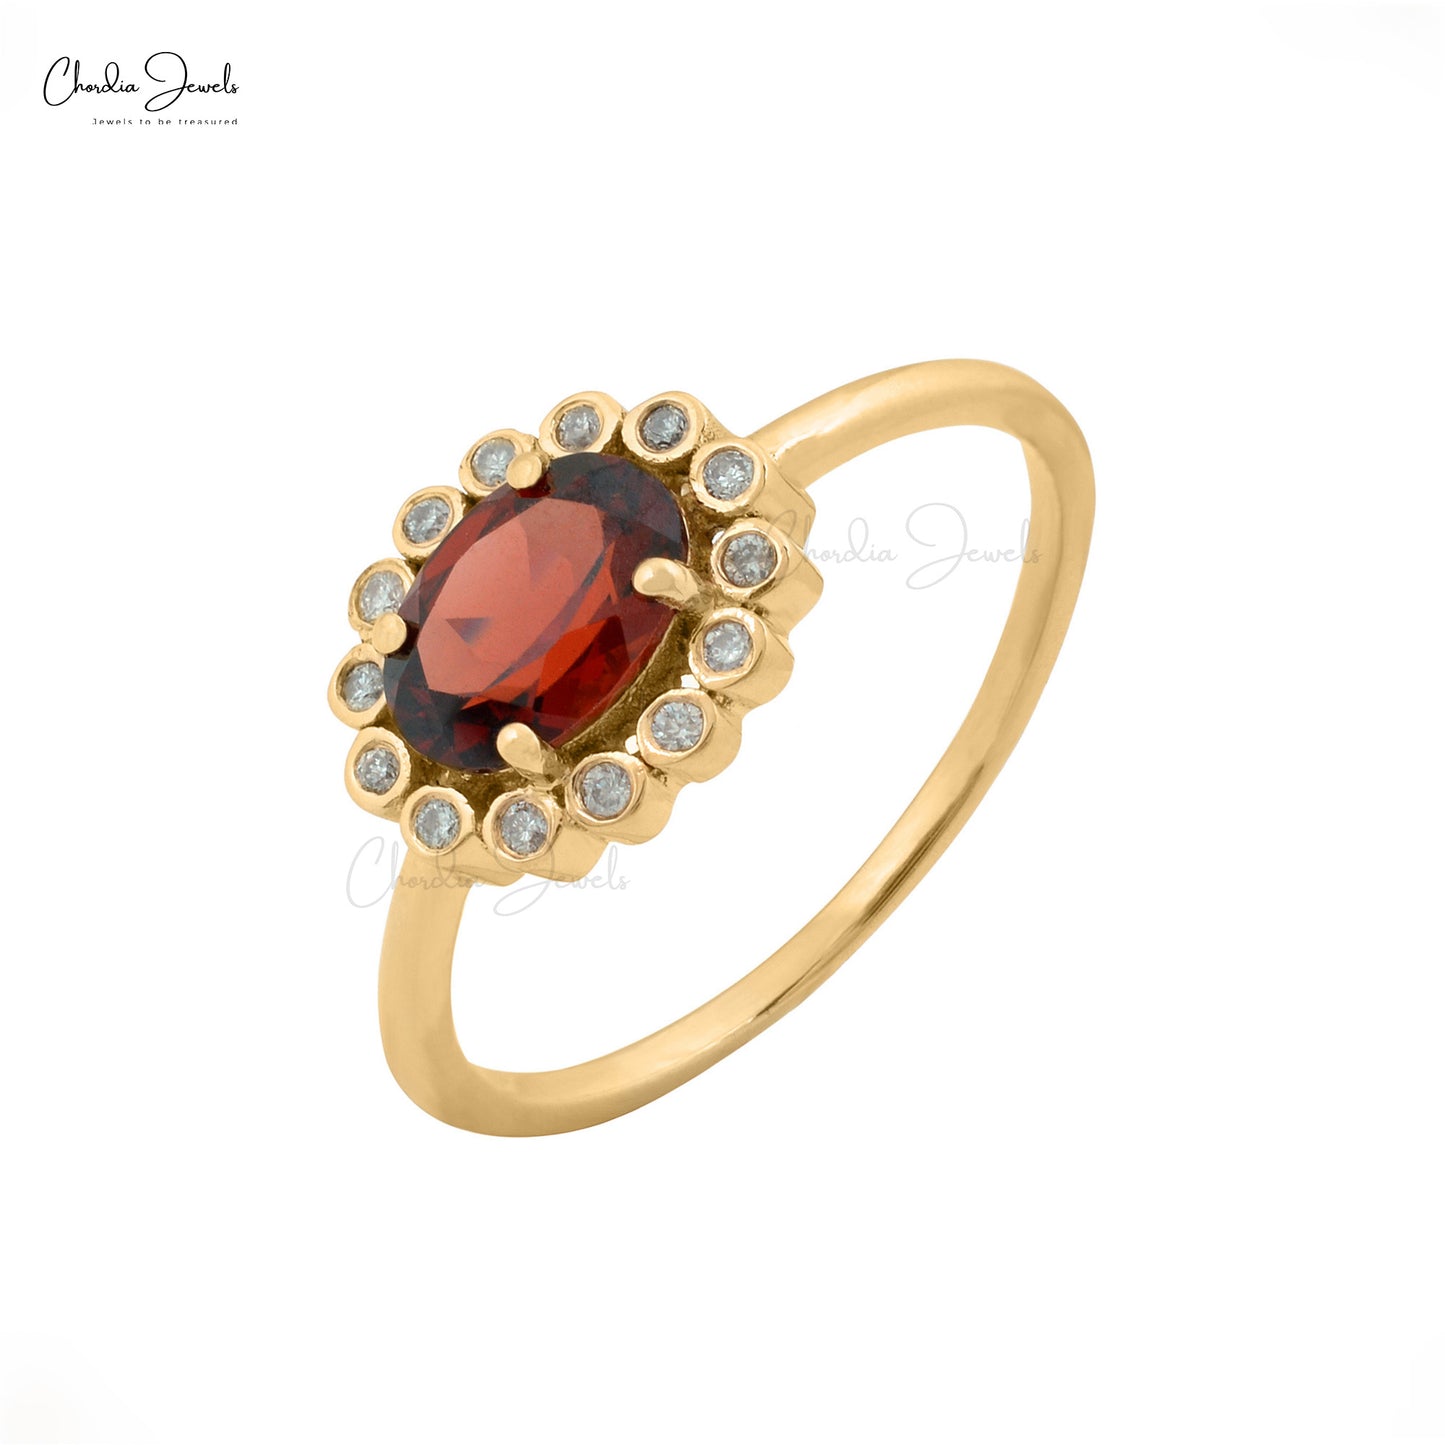 Natural Garnet Halo Ring in 14k Solid Yellow Gold